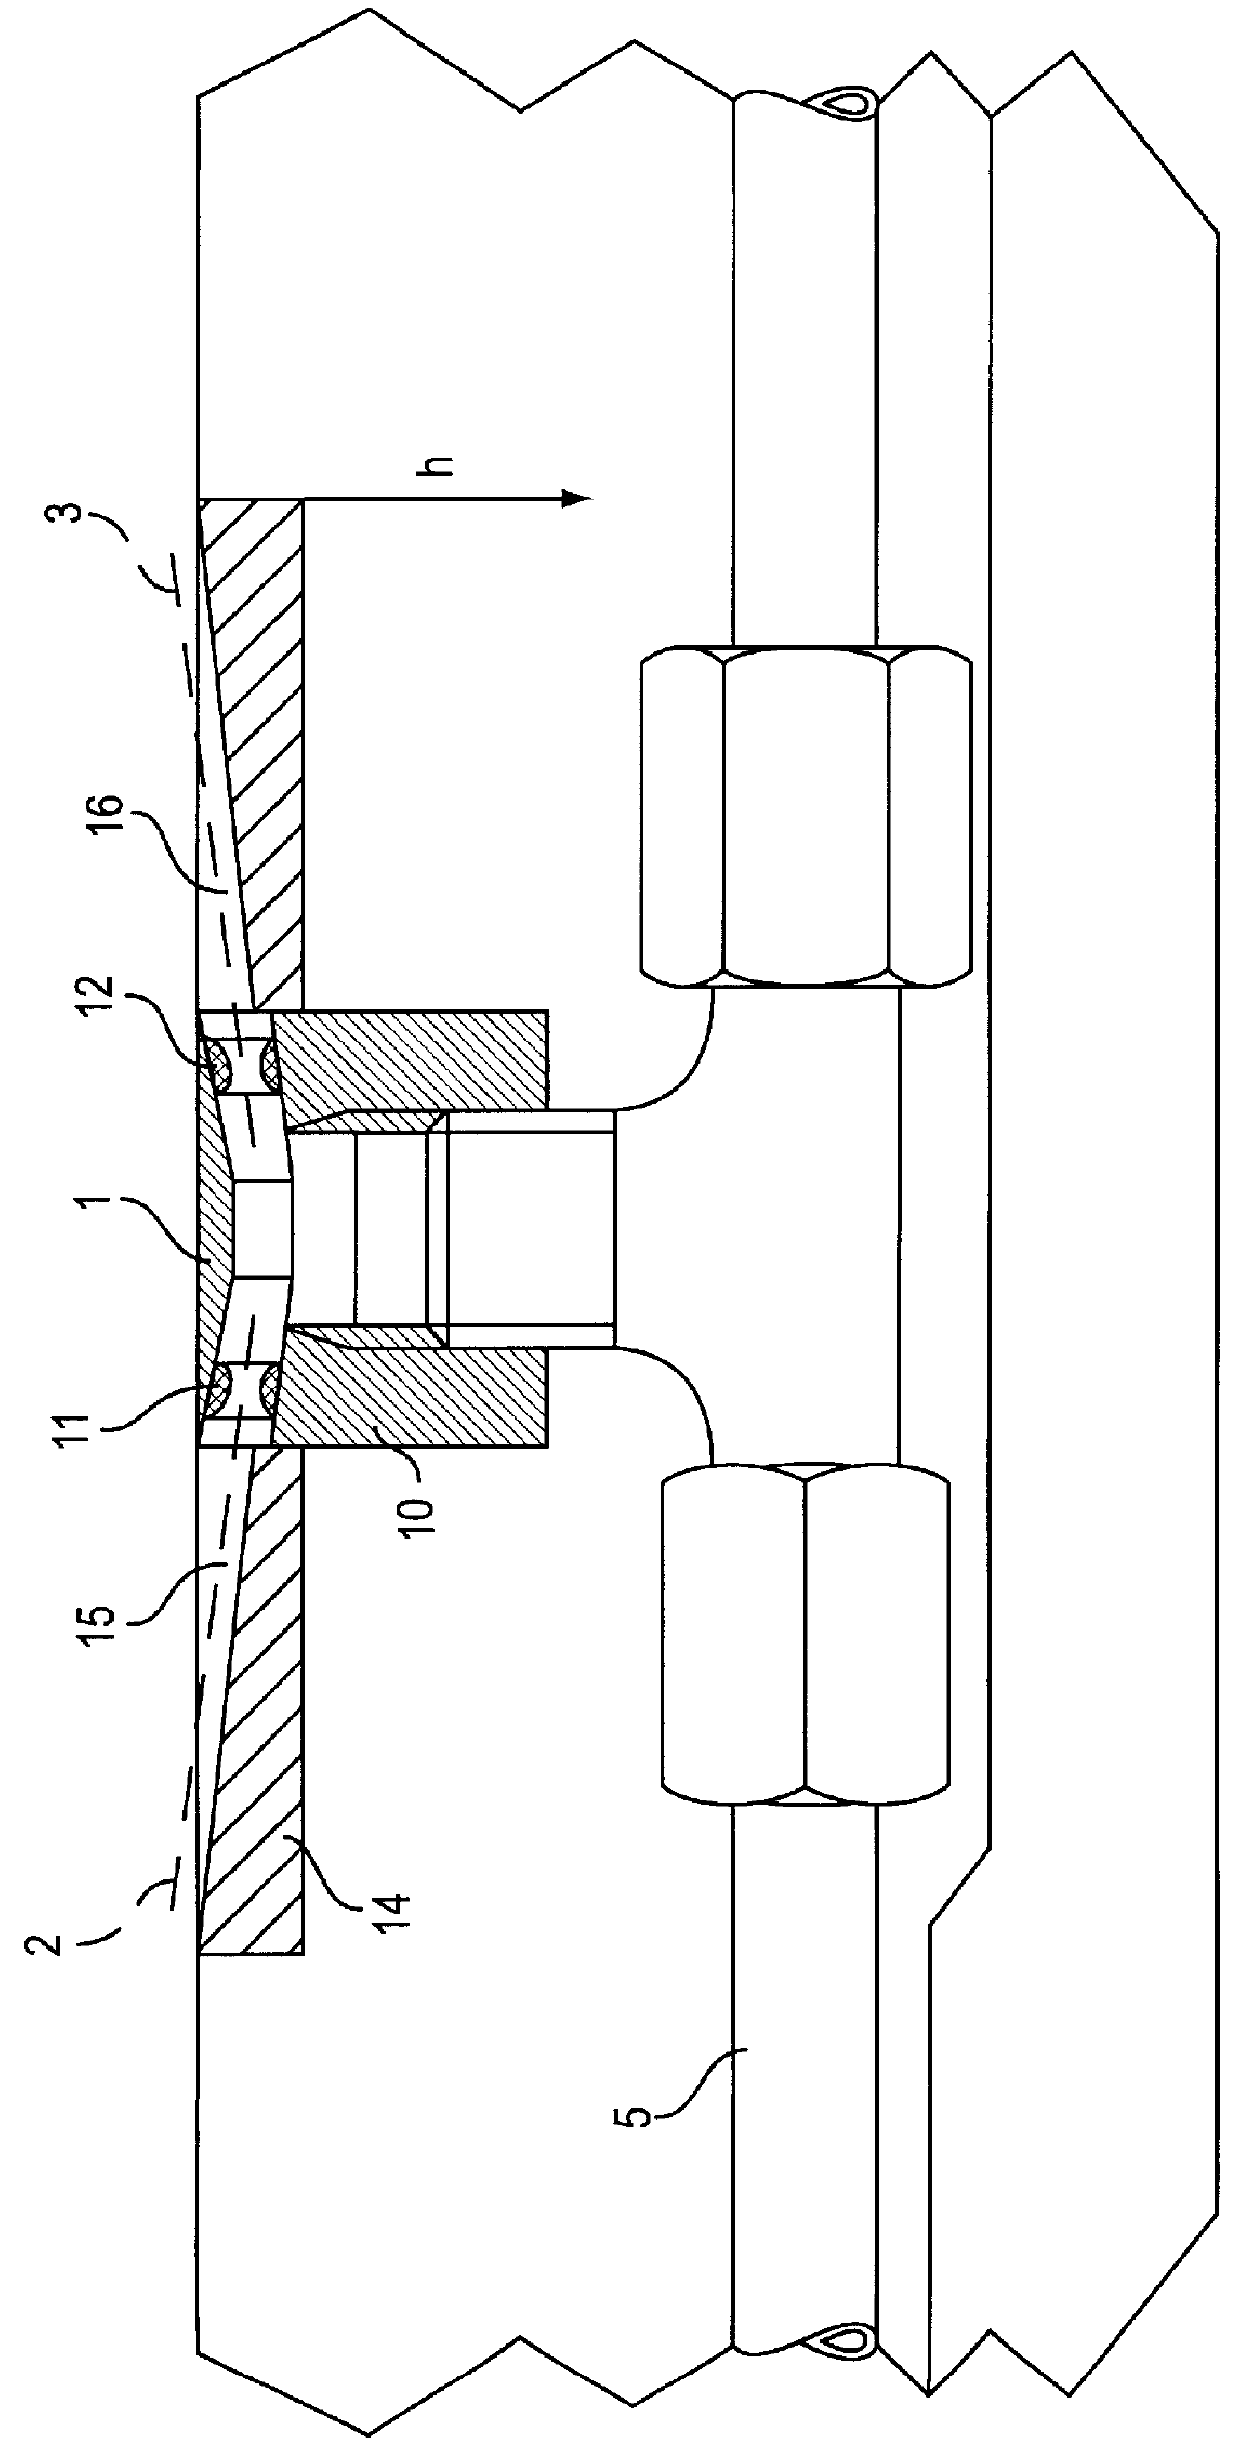 Method and a stationary arrangement for discharging a deicing liquid